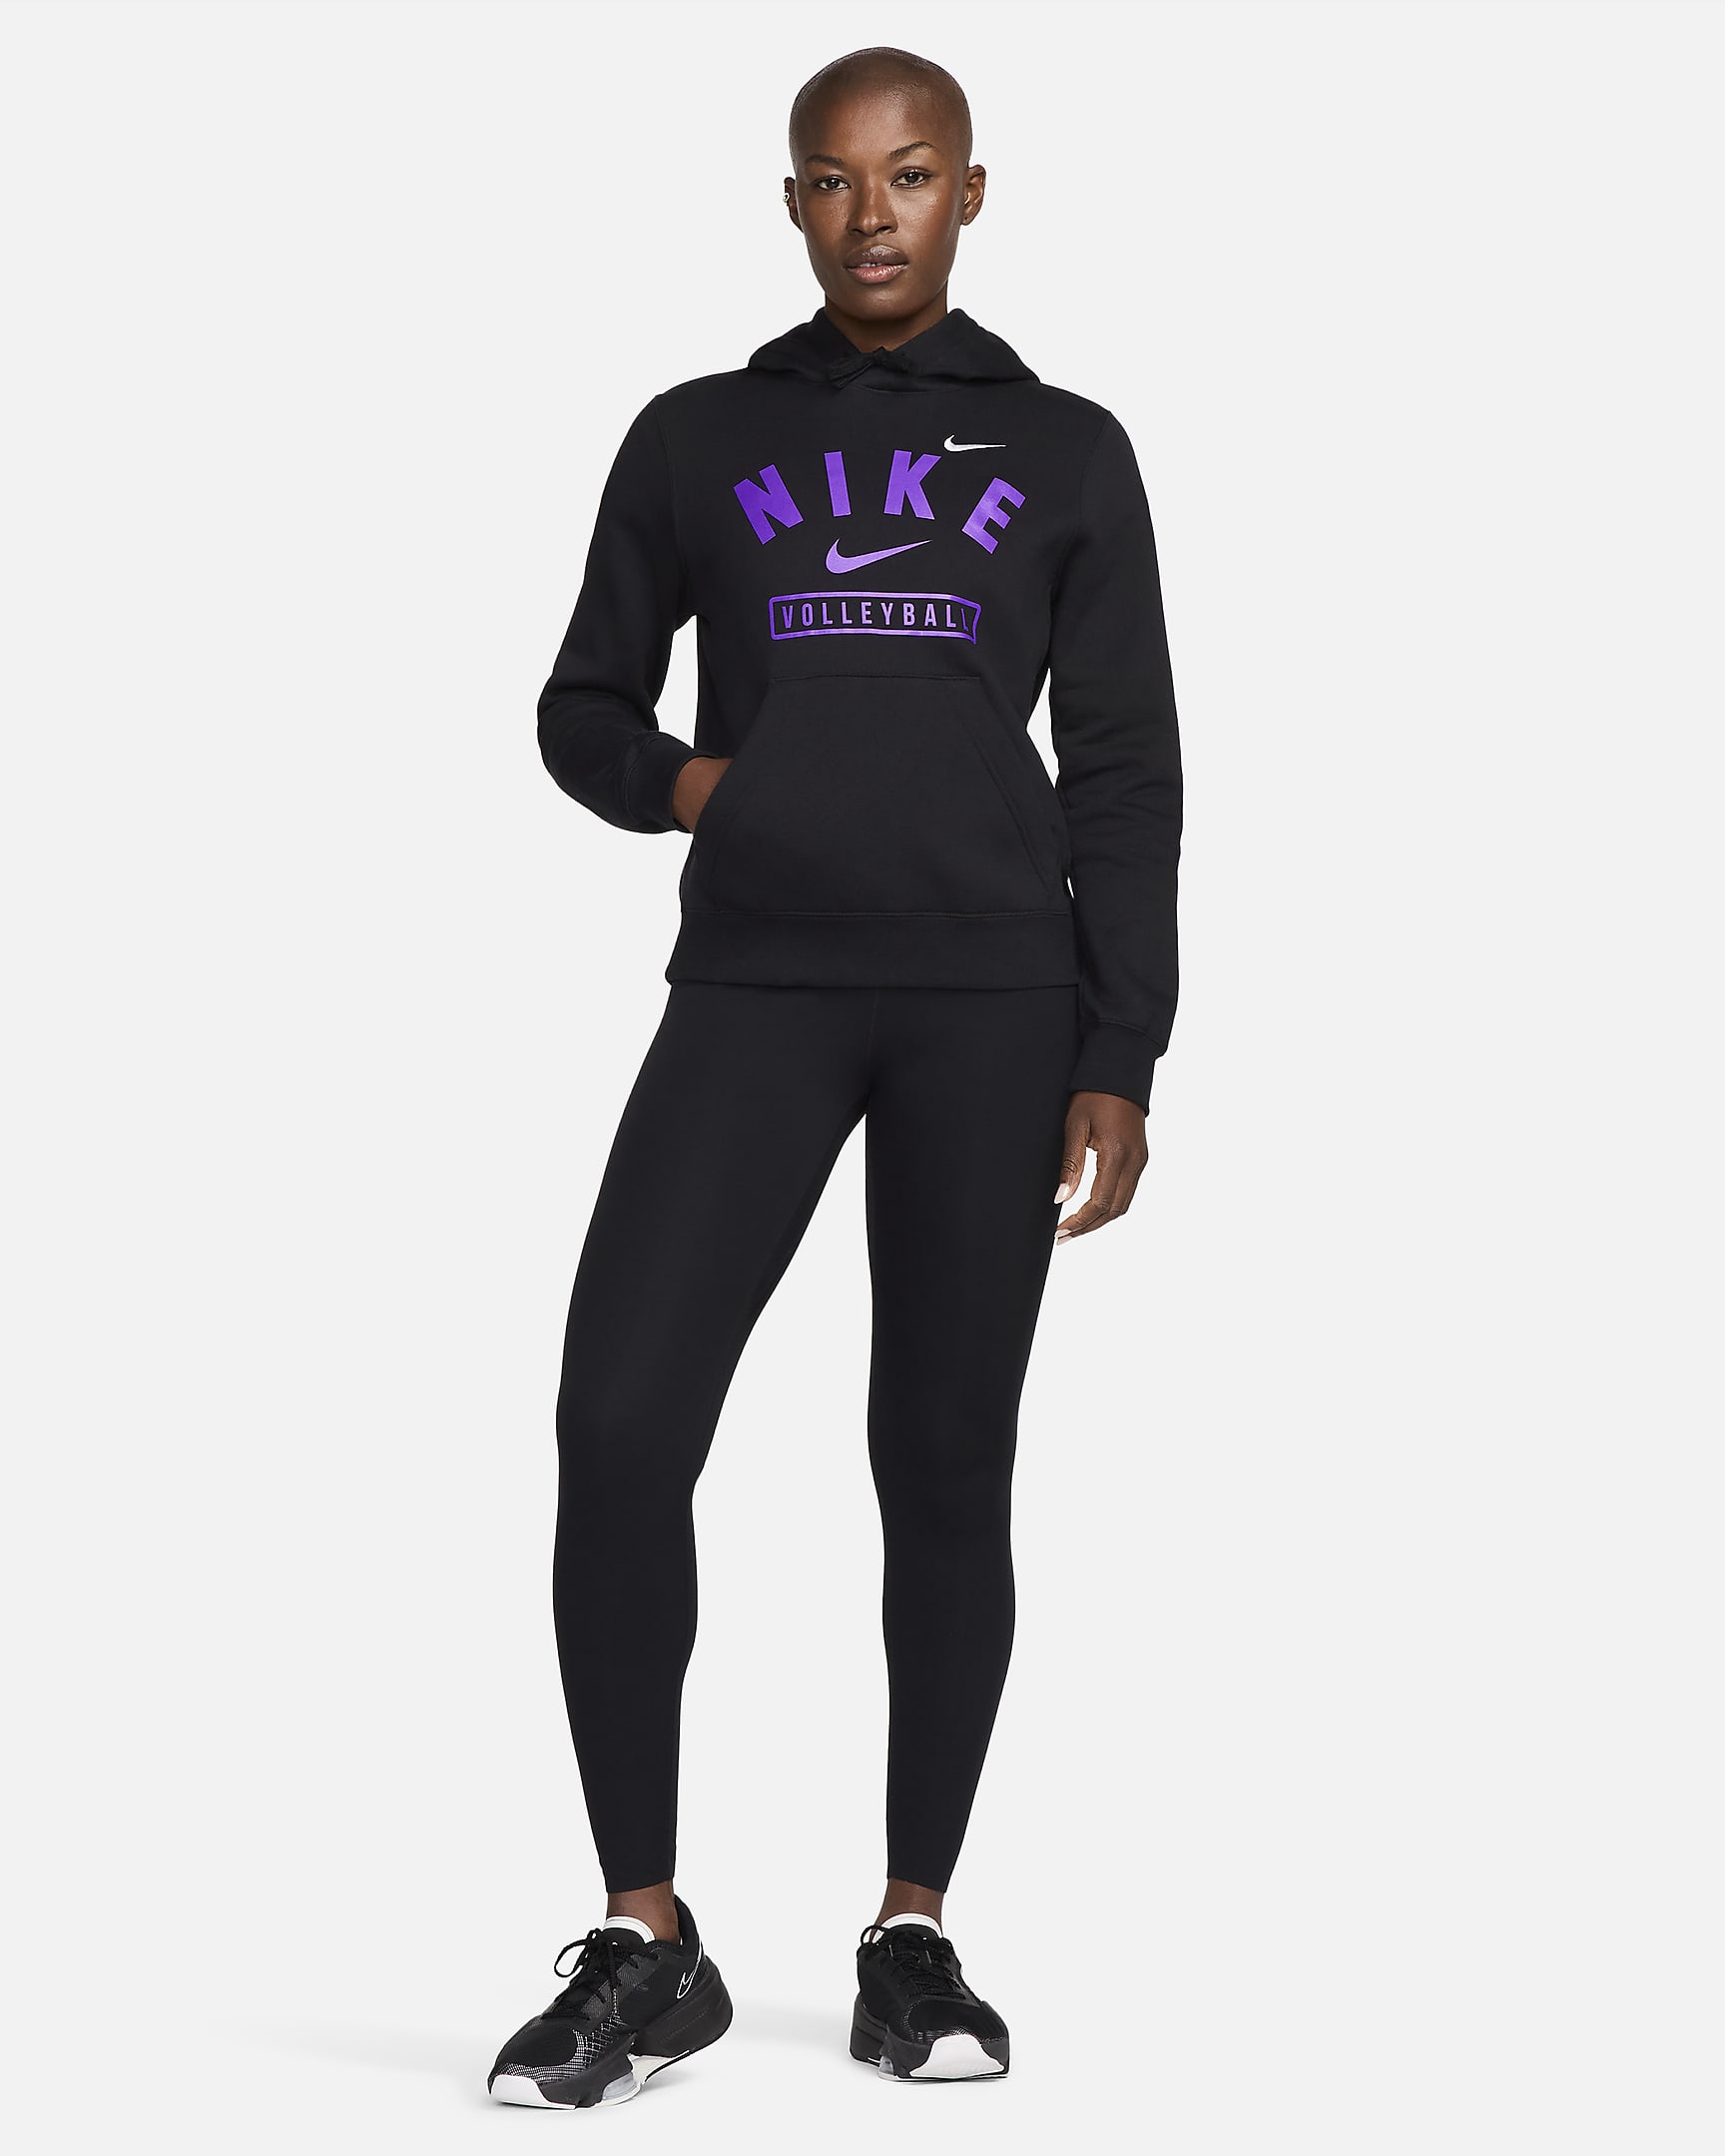 Nike Women's Volleyball Pullover Hoodie. Nike.com